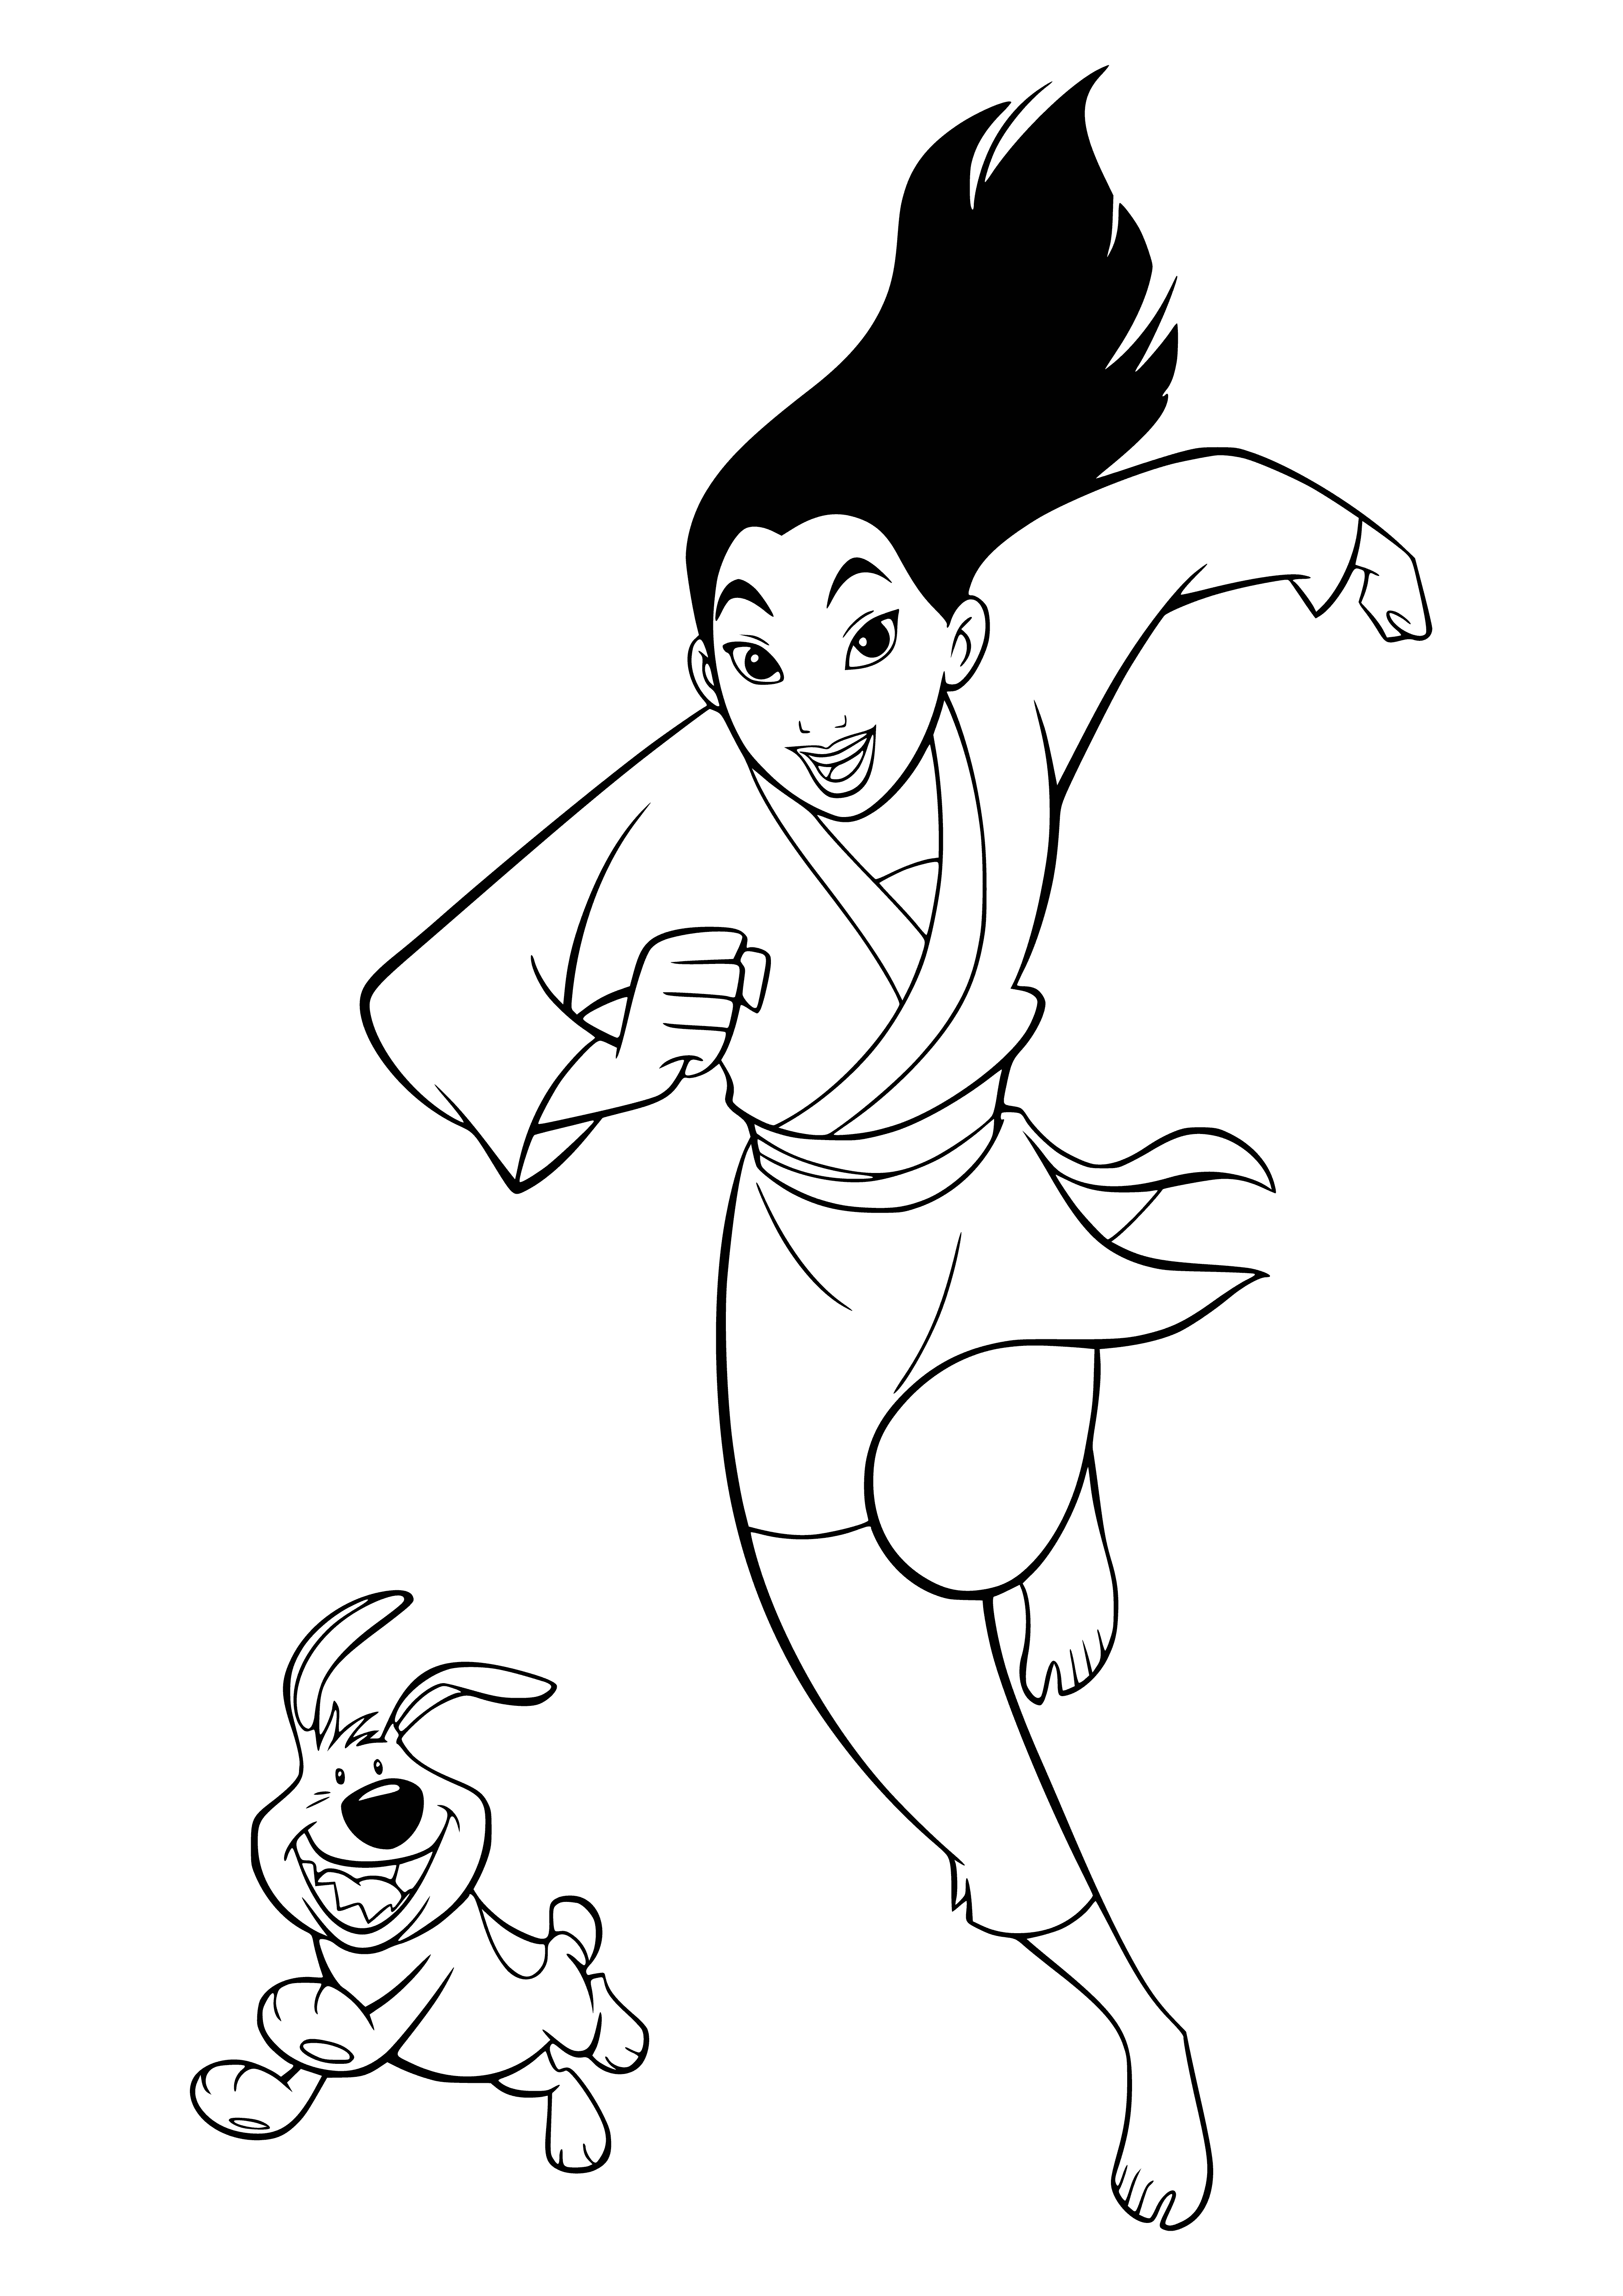 coloring page: Mulan holds a puppy and is wearing traditional Chinese dress. The cute pup licks her chin.